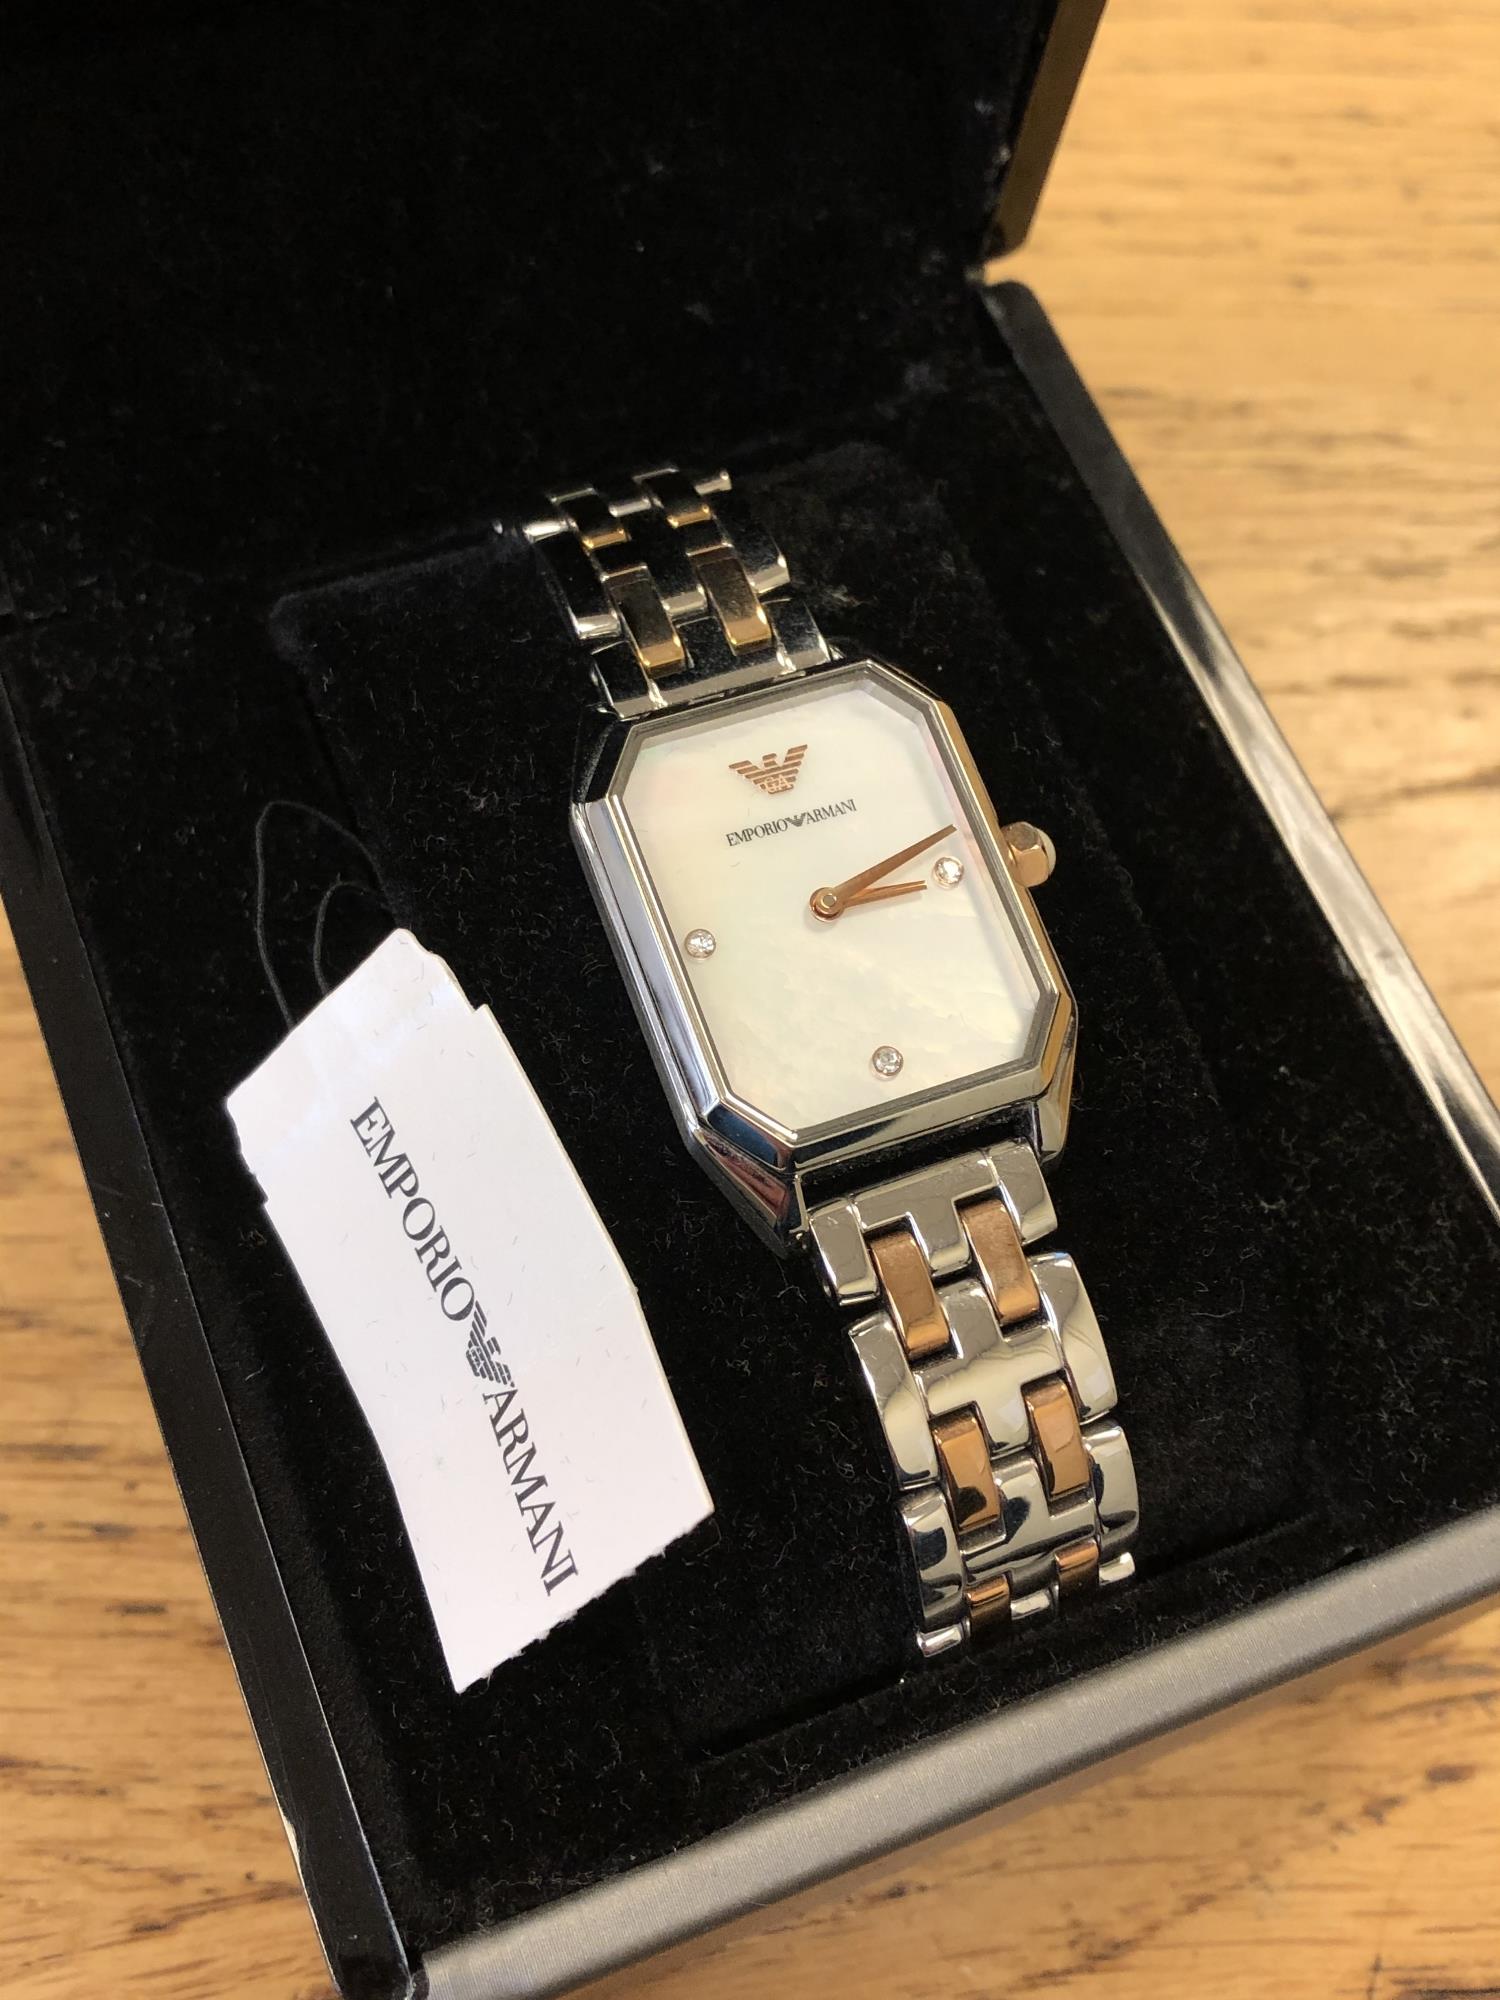 An Emporio Armani stainless steel lady's wristwatch in retail box